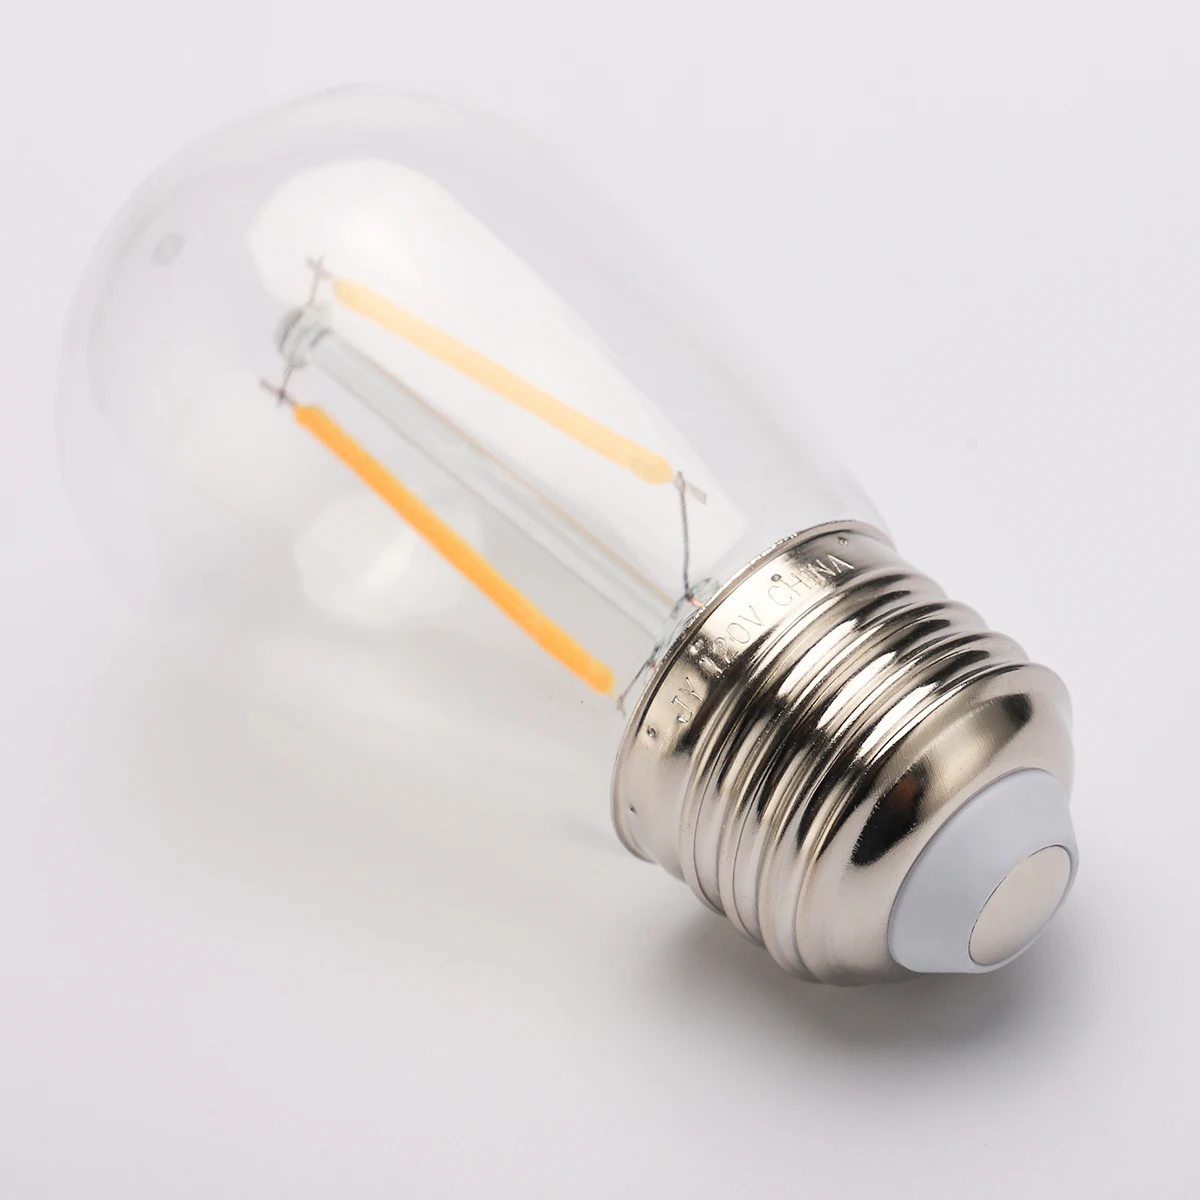 Decorative S14 Led Filament Lighting Bulbs China Direct Factory Cheap Price Wholesale Vintage Edison Bulbs for Lighting  Lamps